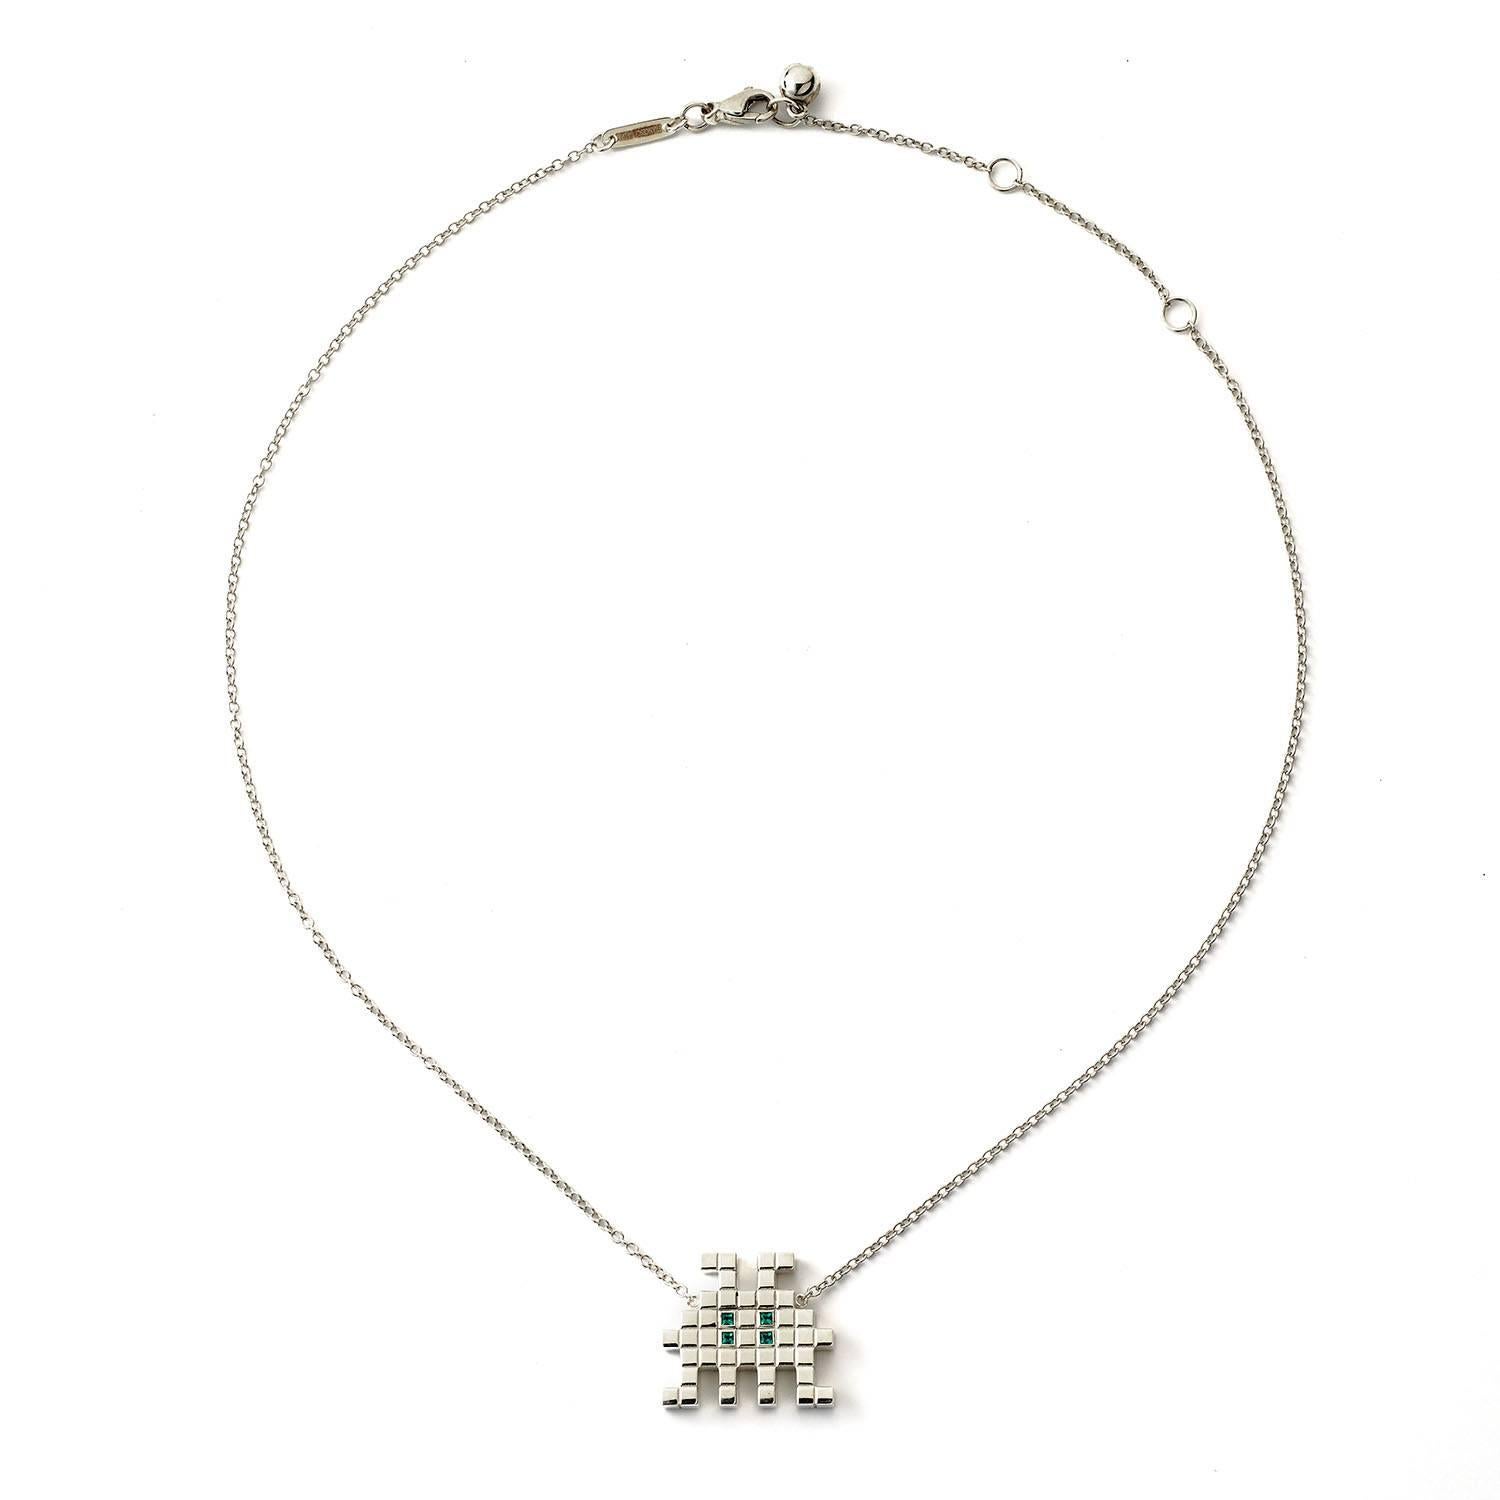 Silver and emerald "Invader III" necklace by Francesca Grima 

Silver set with Emeralds on a Yellow Gold Chain.

・Silver
・4 Princess-cut Emeralds (0.08cts)
・Pendant length: 1.8cm
・Pendant width: 2.1cm
・Chain can be worn in three lengths: